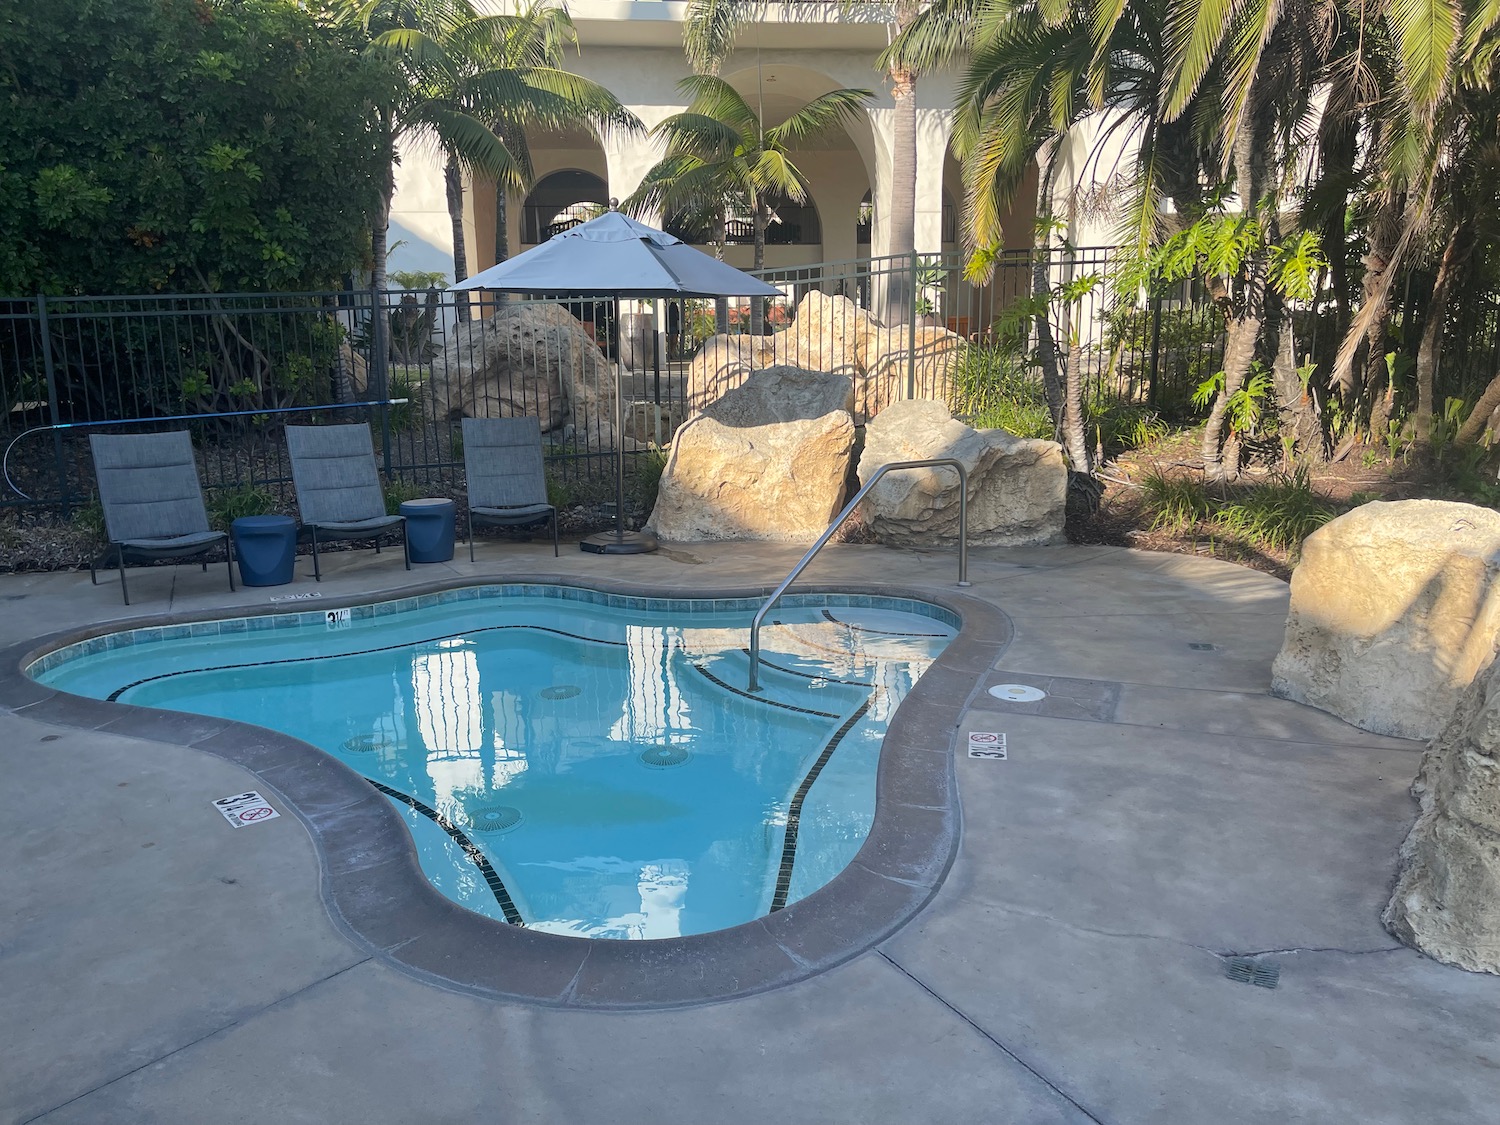 a pool with a metal railing and chairs